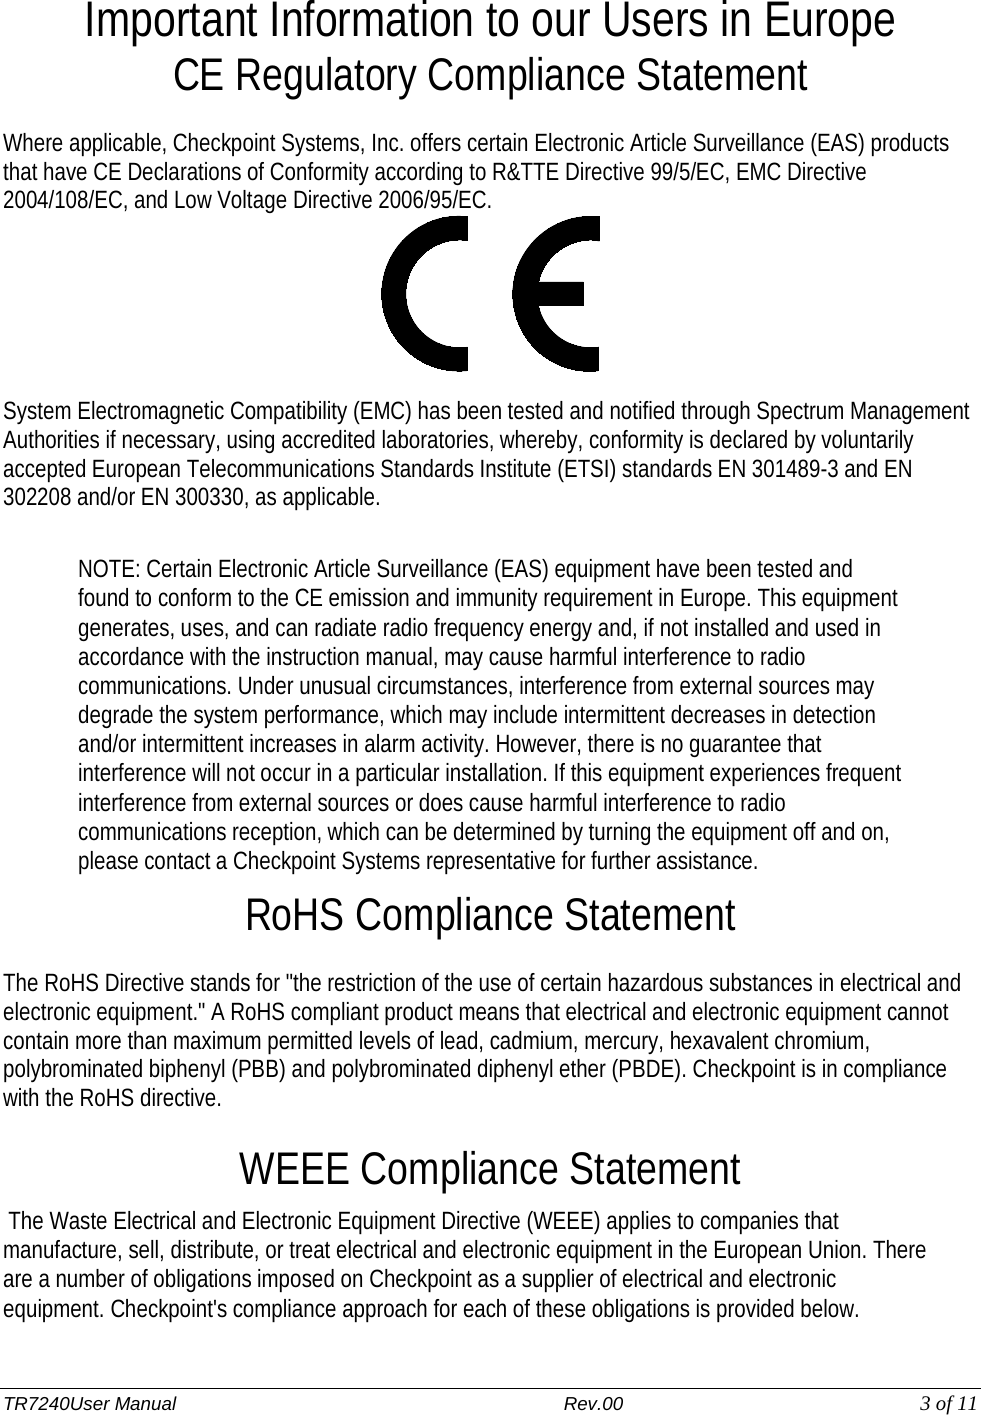 TR7240User Manual                          Rev.00   3 of 11 Important Information to our Users in Europe CE Regulatory Compliance Statement  Where applicable, Checkpoint Systems, Inc. offers certain Electronic Article Surveillance (EAS) products that have CE Declarations of Conformity according to R&amp;TTE Directive 99/5/EC, EMC Directive 2004/108/EC, and Low Voltage Directive 2006/95/EC.   System Electromagnetic Compatibility (EMC) has been tested and notified through Spectrum Management Authorities if necessary, using accredited laboratories, whereby, conformity is declared by voluntarily accepted European Telecommunications Standards Institute (ETSI) standards EN 301489-3 and EN 302208 and/or EN 300330, as applicable.  NOTE: Certain Electronic Article Surveillance (EAS) equipment have been tested and found to conform to the CE emission and immunity requirement in Europe. This equipment generates, uses, and can radiate radio frequency energy and, if not installed and used in accordance with the instruction manual, may cause harmful interference to radio communications. Under unusual circumstances, interference from external sources may degrade the system performance, which may include intermittent decreases in detection and/or intermittent increases in alarm activity. However, there is no guarantee that interference will not occur in a particular installation. If this equipment experiences frequent interference from external sources or does cause harmful interference to radio communications reception, which can be determined by turning the equipment off and on, please contact a Checkpoint Systems representative for further assistance. RoHS Compliance Statement  The RoHS Directive stands for &quot;the restriction of the use of certain hazardous substances in electrical and electronic equipment.&quot; A RoHS compliant product means that electrical and electronic equipment cannot contain more than maximum permitted levels of lead, cadmium, mercury, hexavalent chromium, polybrominated biphenyl (PBB) and polybrominated diphenyl ether (PBDE). Checkpoint is in compliance with the RoHS directive.  WEEE Compliance Statement  The Waste Electrical and Electronic Equipment Directive (WEEE) applies to companies that manufacture, sell, distribute, or treat electrical and electronic equipment in the European Union. There are a number of obligations imposed on Checkpoint as a supplier of electrical and electronic equipment. Checkpoint&apos;s compliance approach for each of these obligations is provided below.